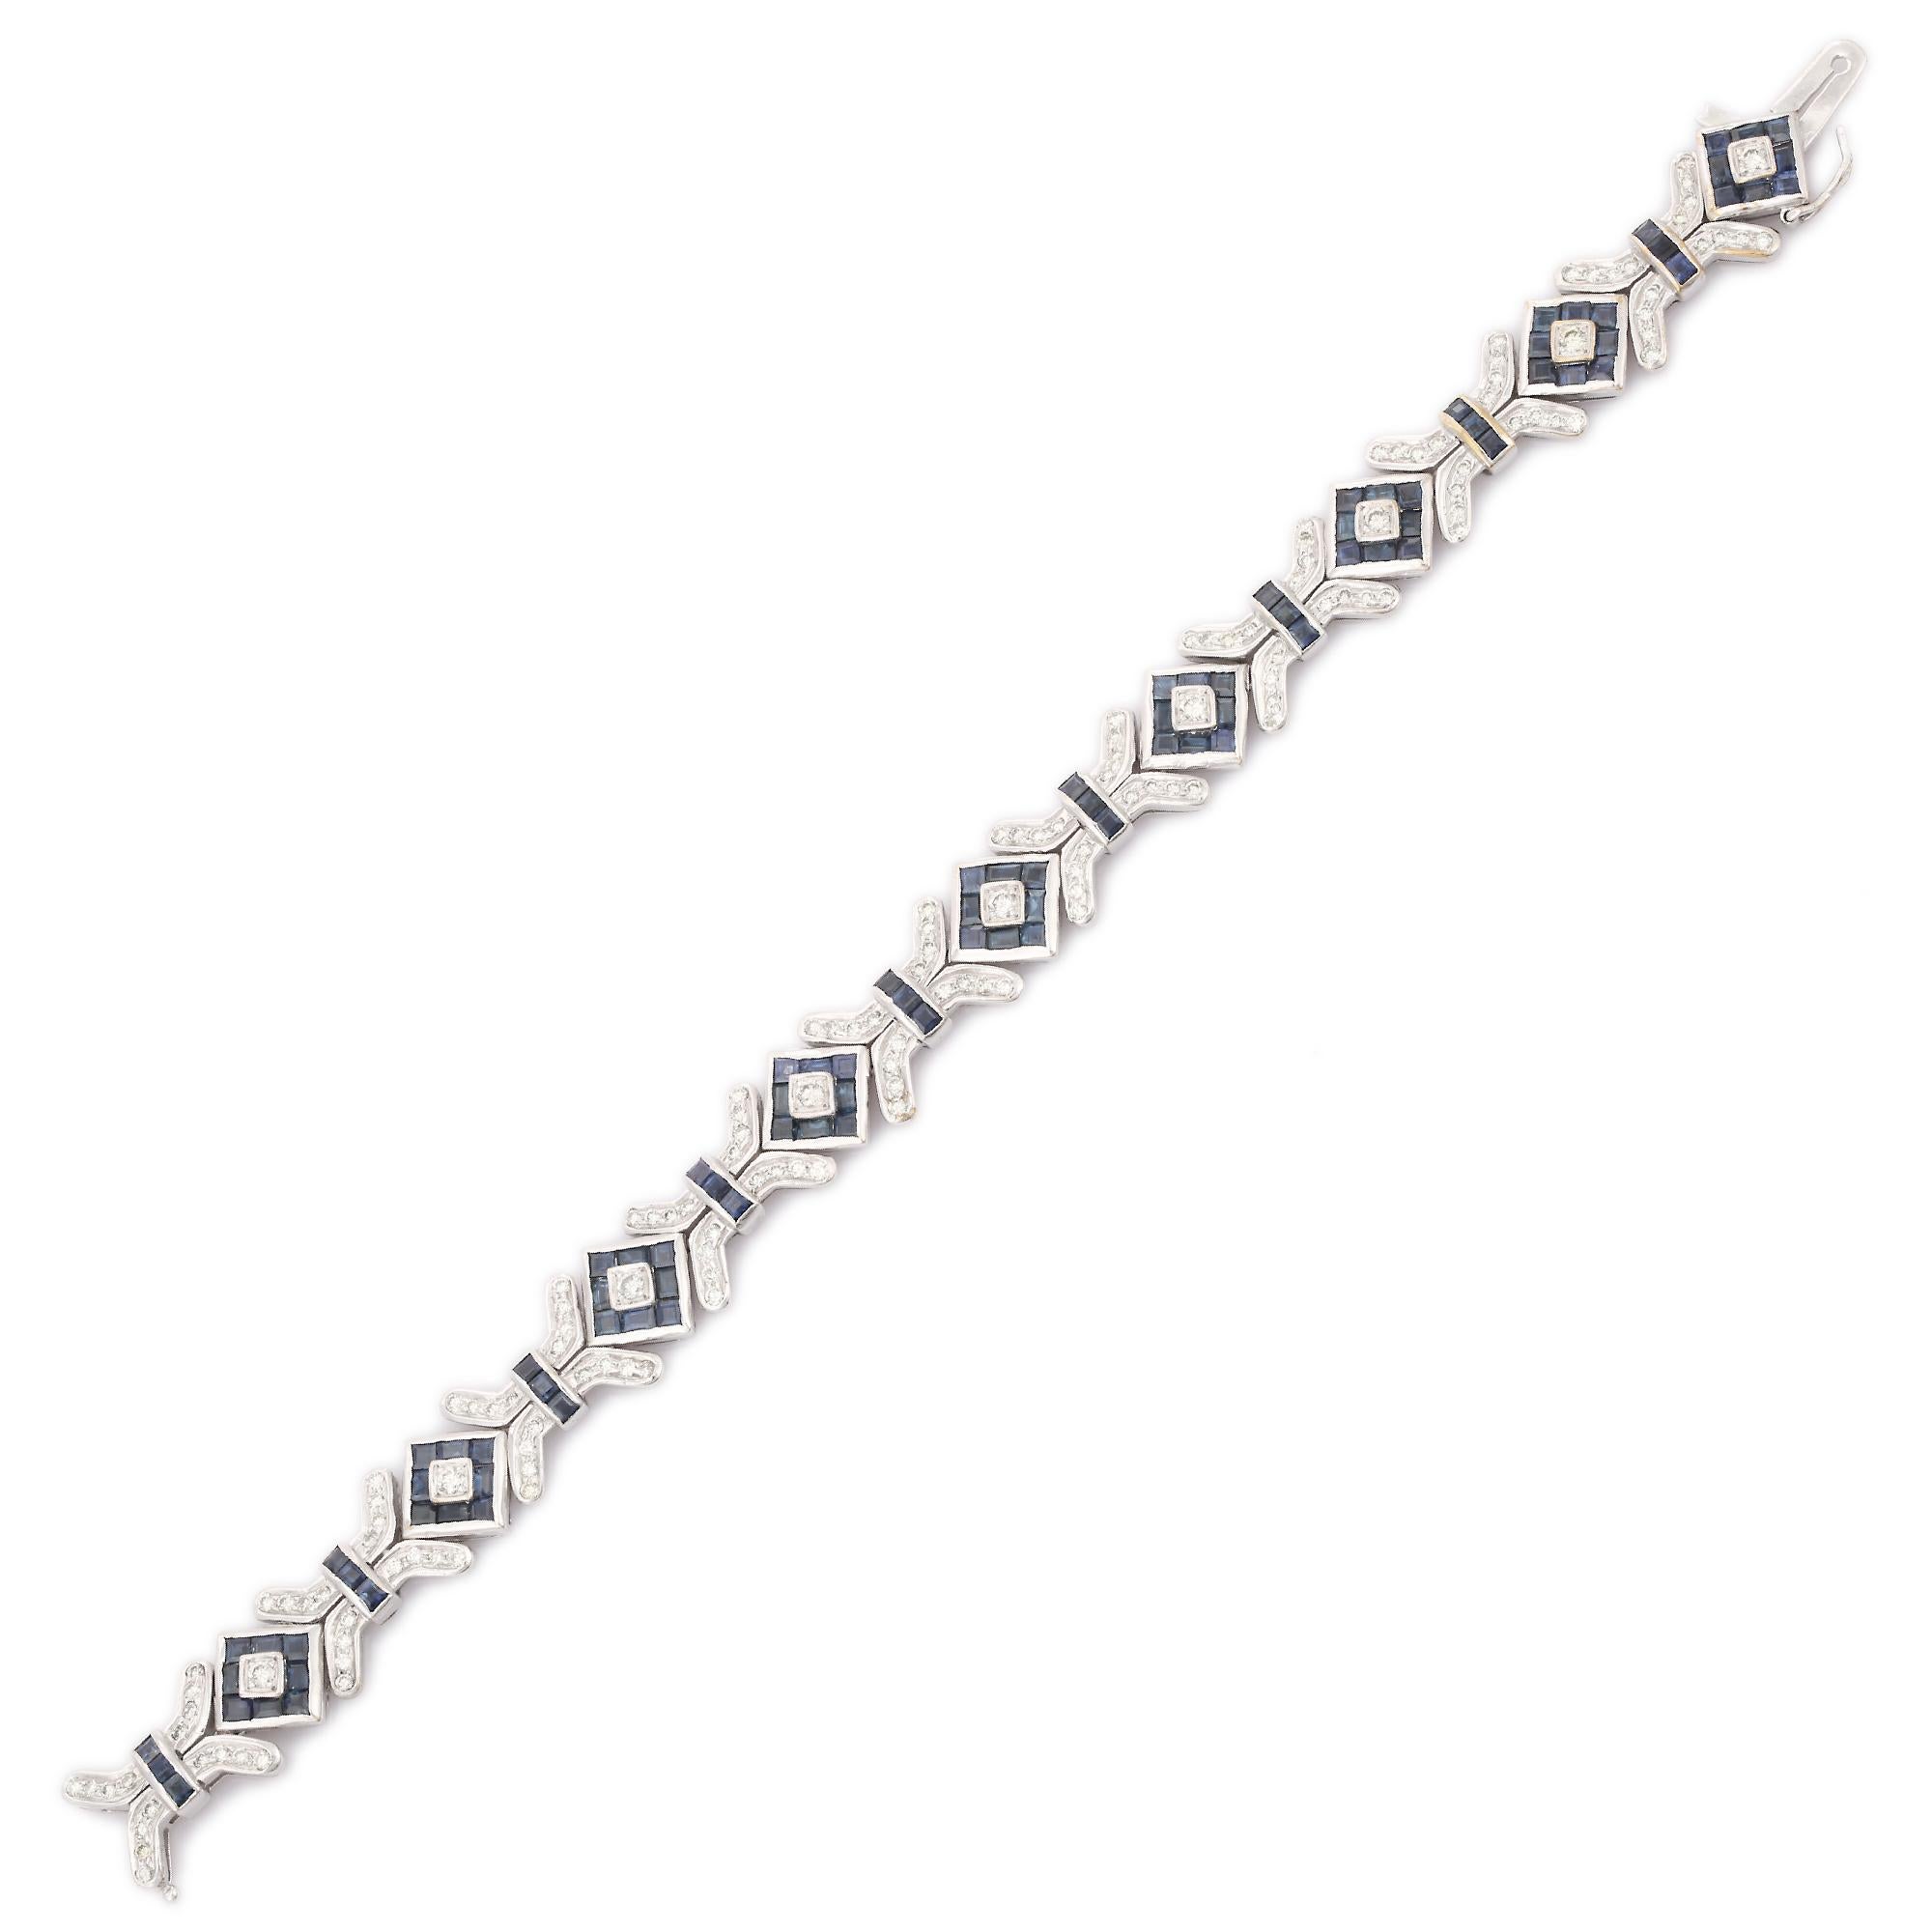 This Art Deco Style Diamond and Blue Sapphire Bracelet in 18K gold showcases 99 endlessly sparkling natural sapphires, weighing 10.90 carat and diamonds weighing 2.21 carats. It measures 7.5 inches long in length. 
Sapphire stimulate concentration